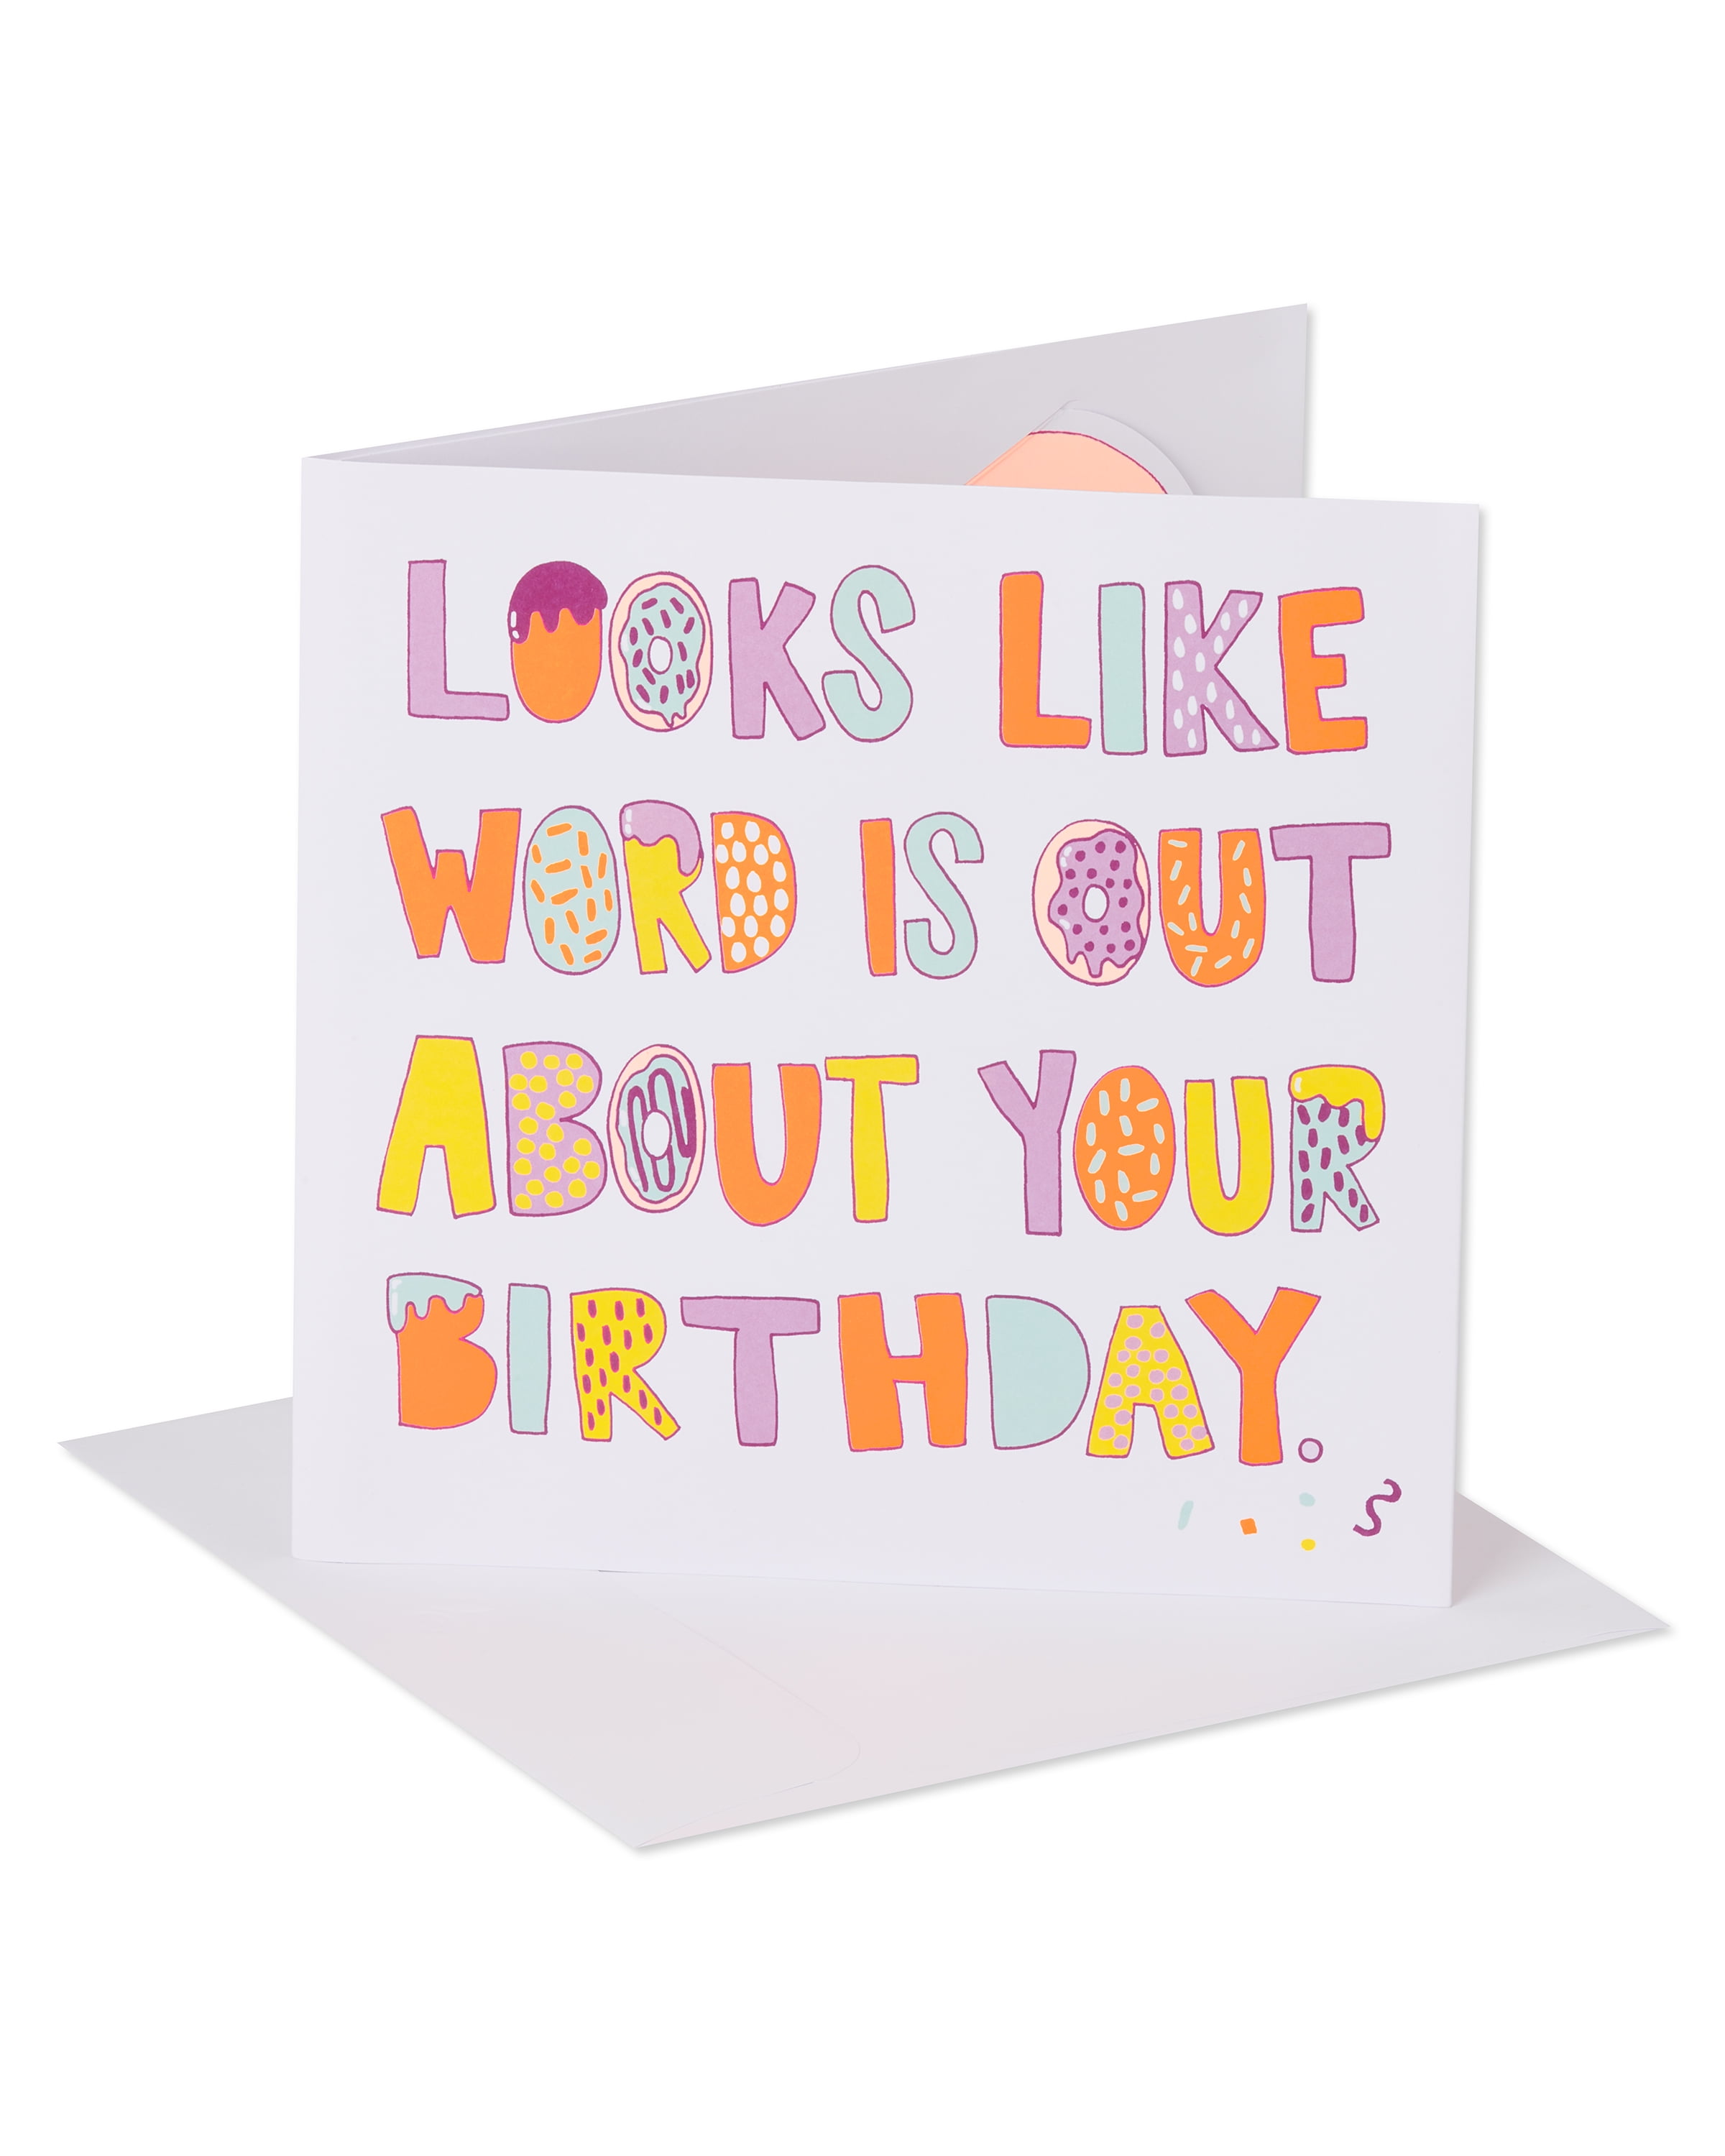 Details about   Touch Greeting Card Birthday card with music on touch-Happy Birthday...- 							te mit Musik auf Berührung data-mtsrclang=en-US href=# onclick=return false; 							show original title Happy Birthday... 